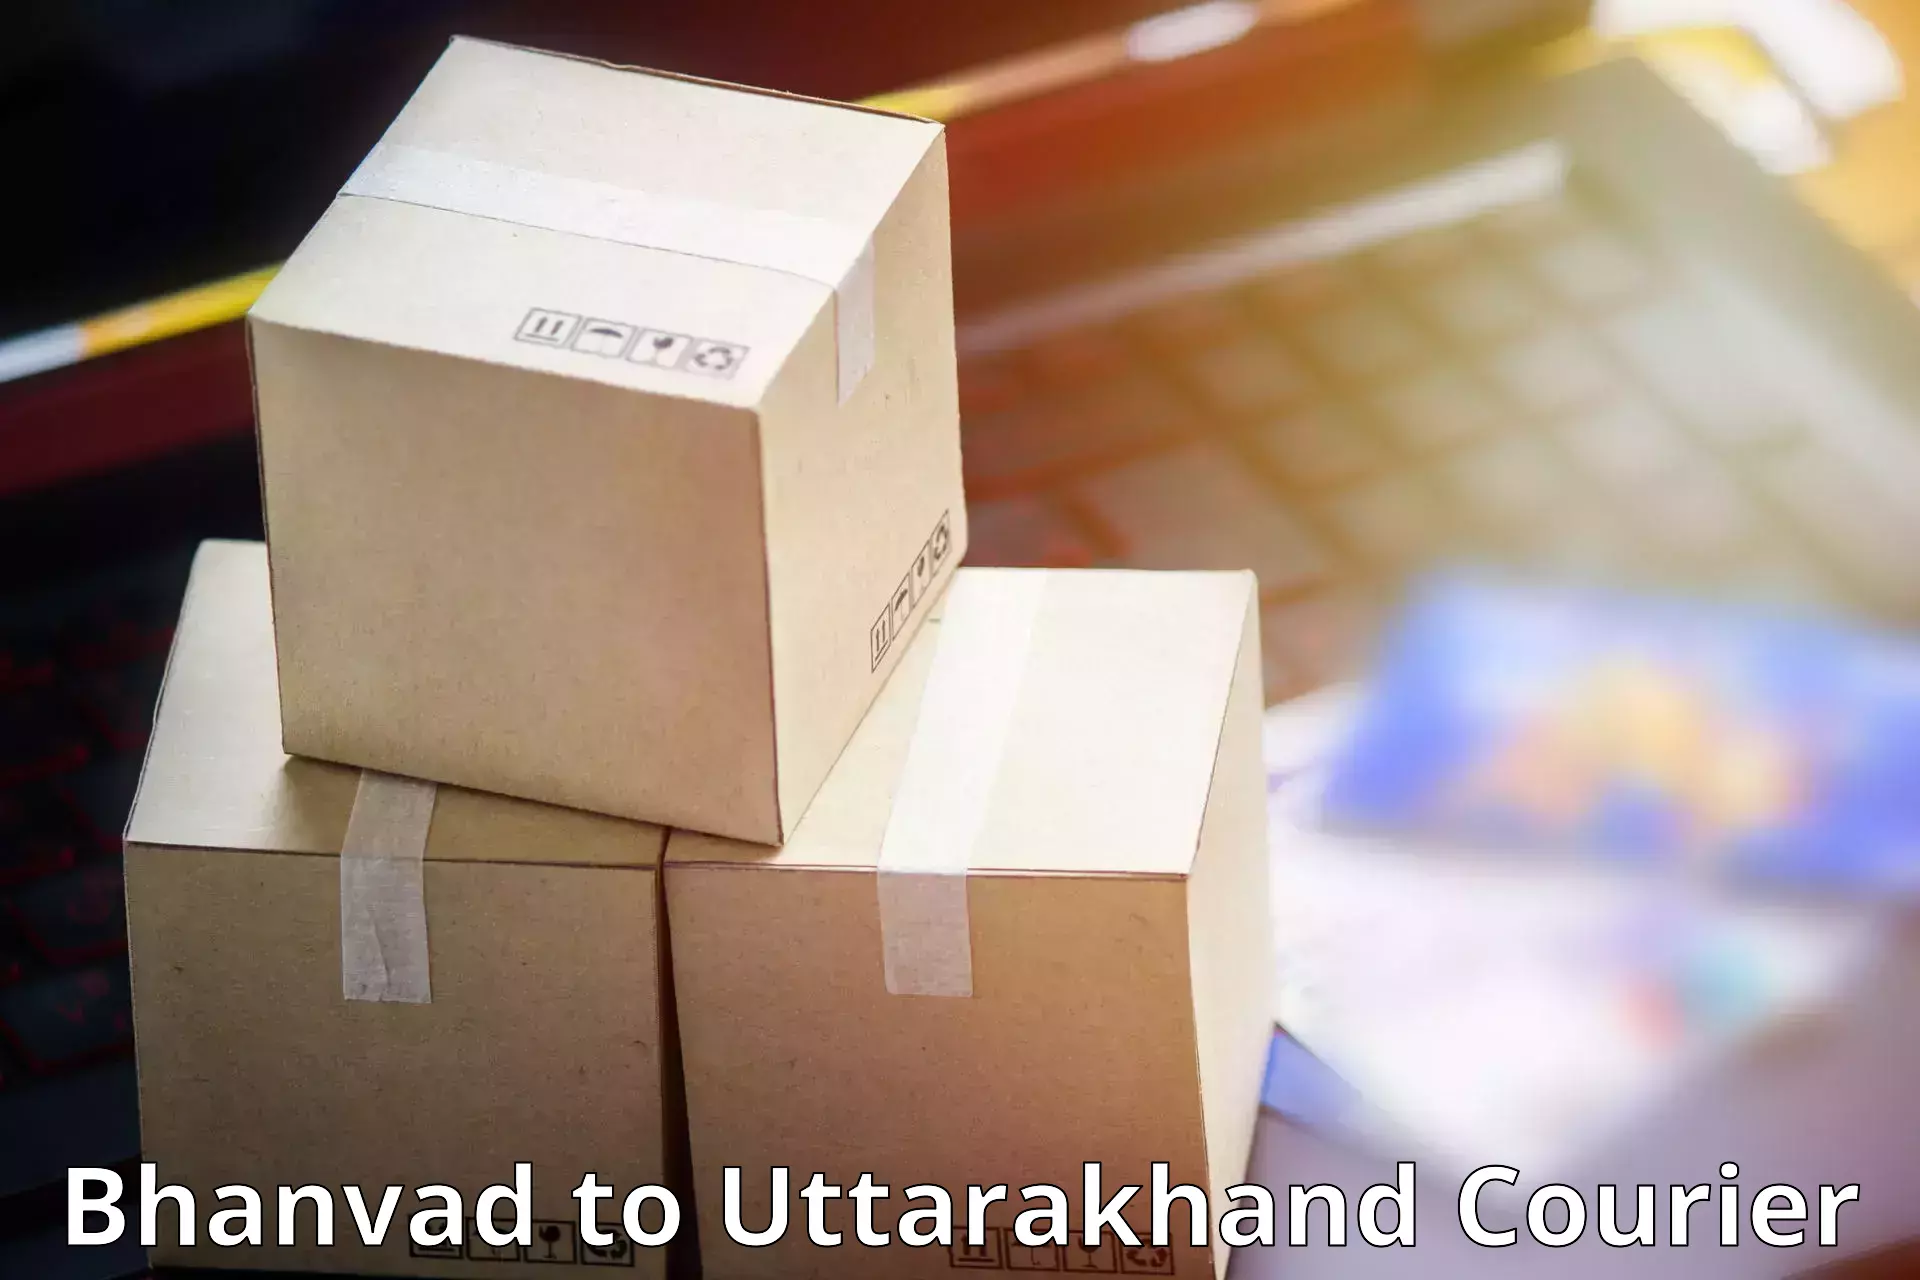 Bulk courier orders in Bhanvad to Paithani